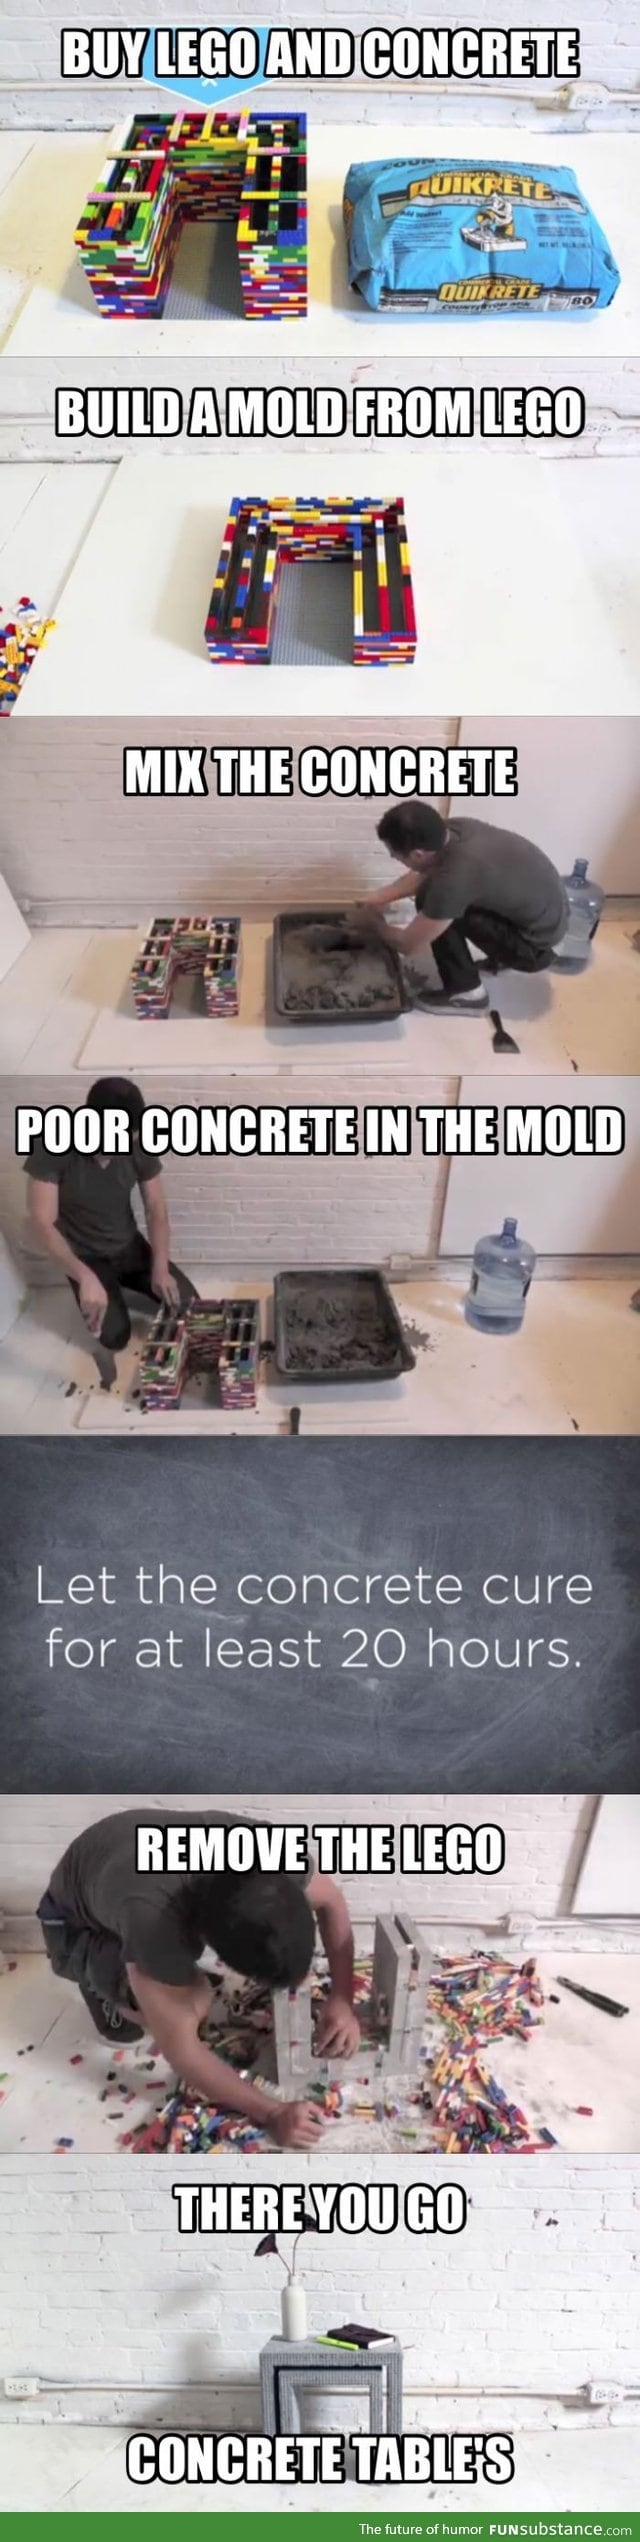 Building with LEGO concrete mold